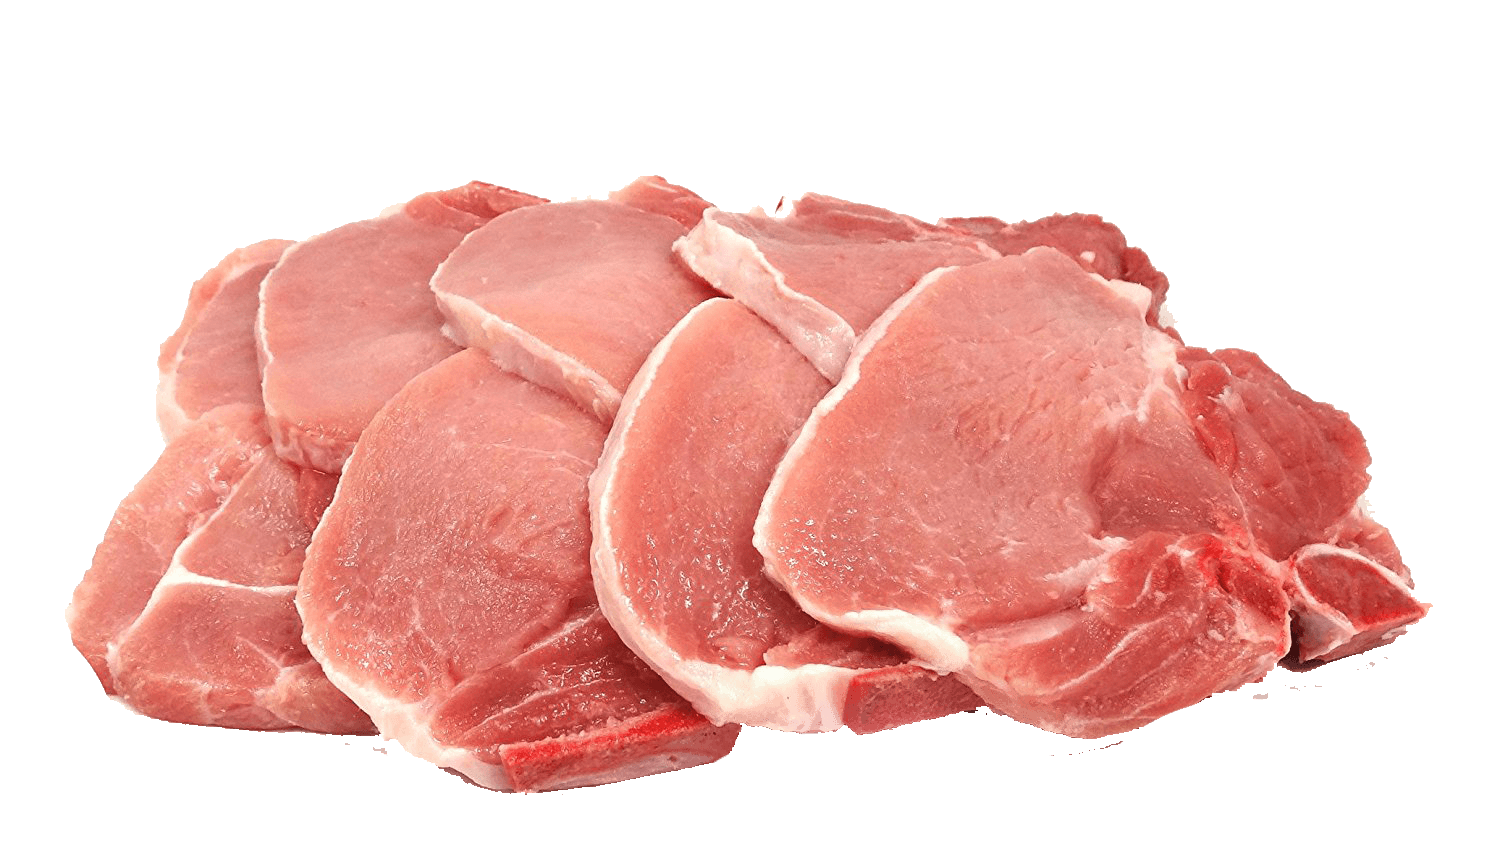 Fresh Local Meat Delivery - Thin Size Pork Chops - (1/4 Inch Thick 2 Pounds) - Family Pack - Cut Fresh Daily -8 Chops. Includes Shipping